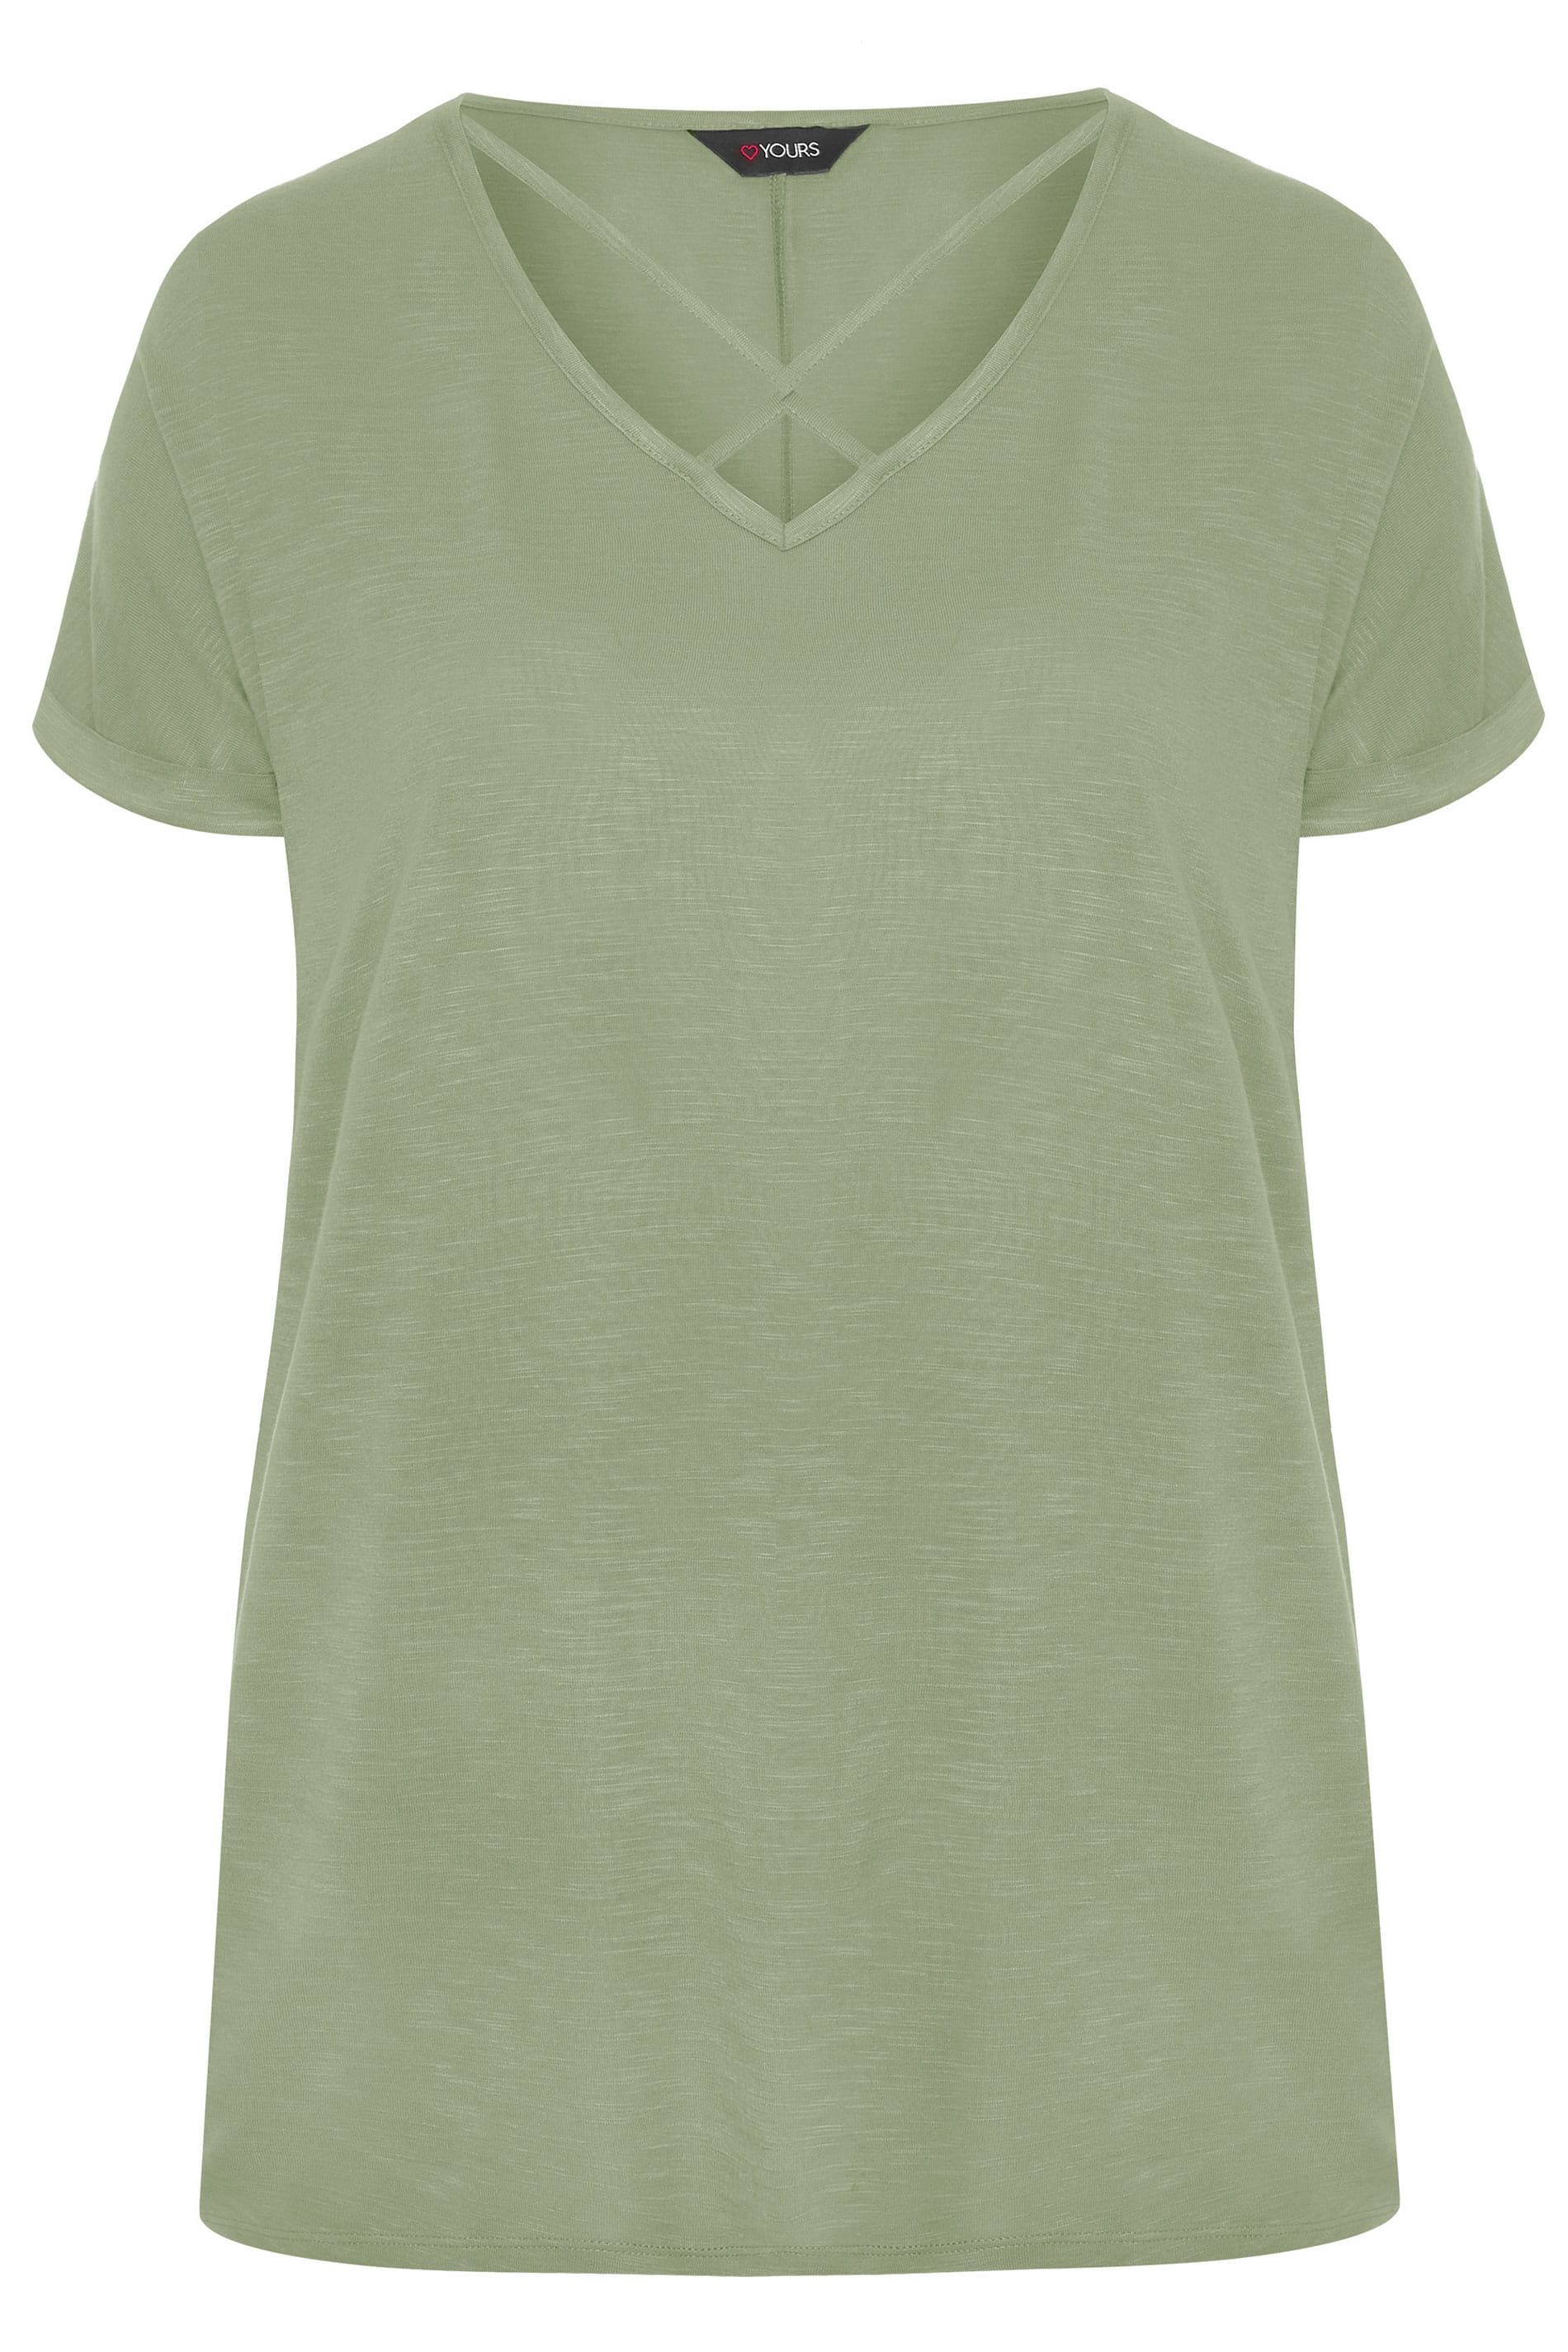 Khaki Green Lattice Front Top | Yours Clothing